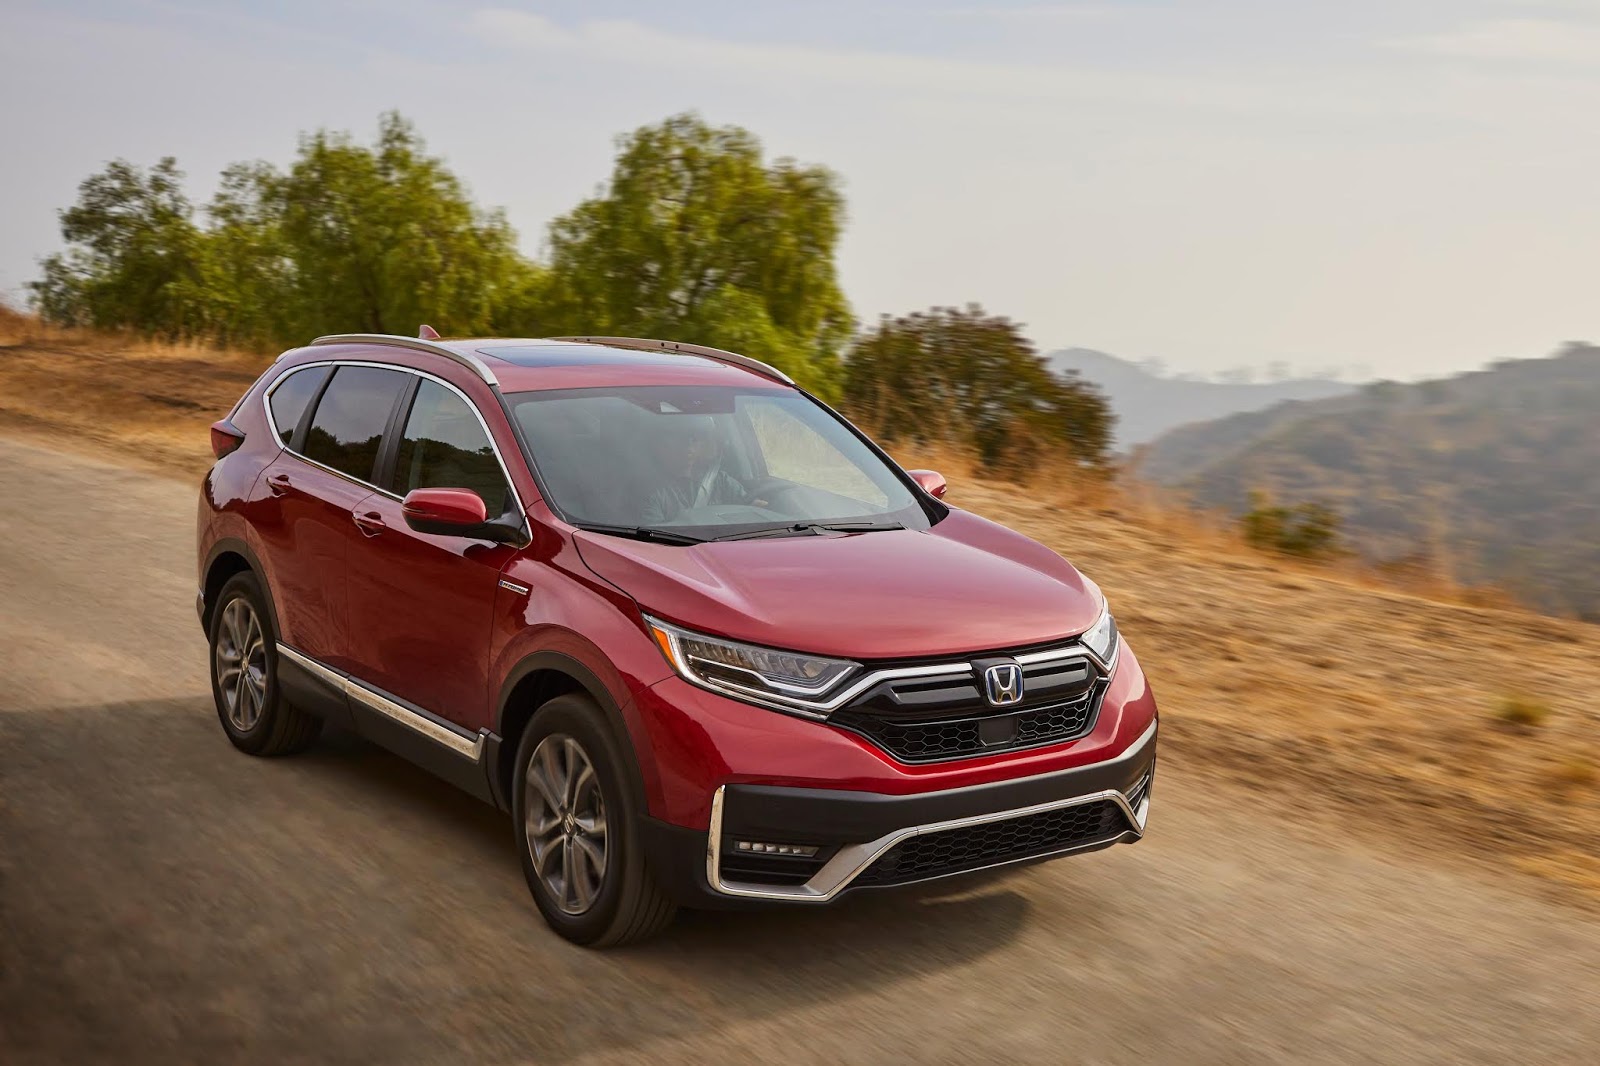 2020 Honda CR-V Hybrid Arriving at Dealerships as the Most Powerful, Refined and Fuel-Efficient